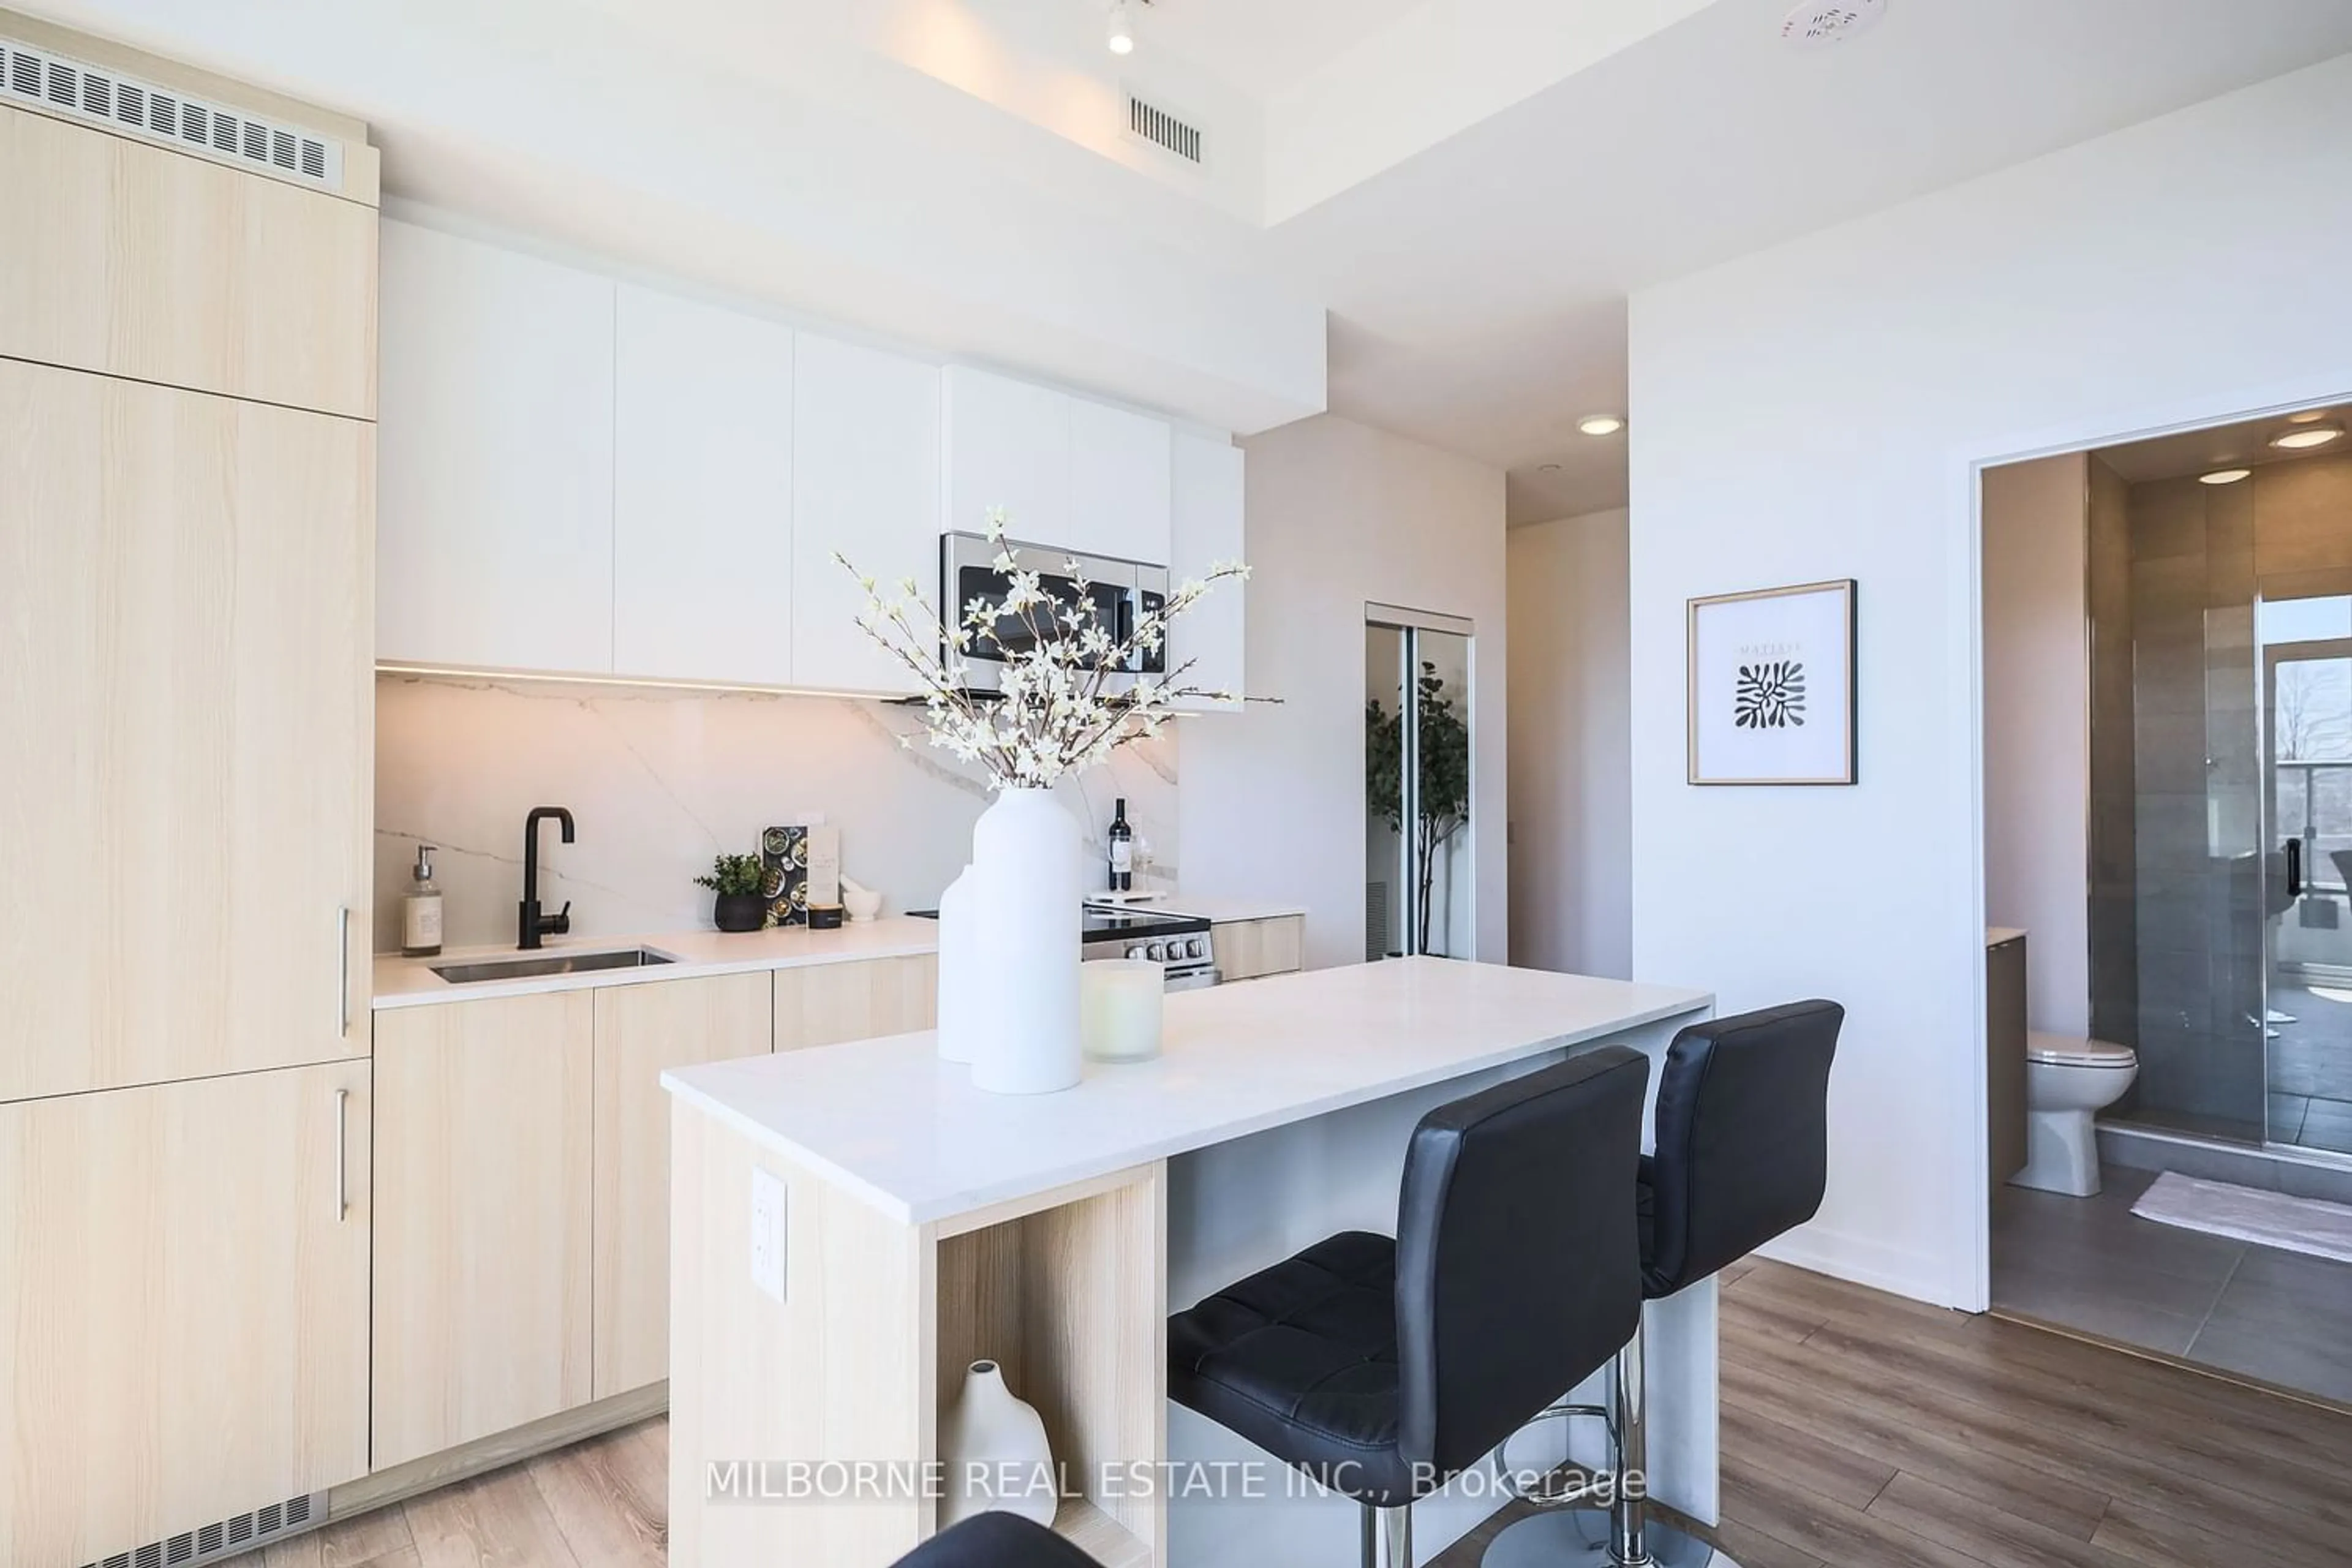 Contemporary kitchen for 500 Dupont St #318, Toronto Ontario M6G 1Y7